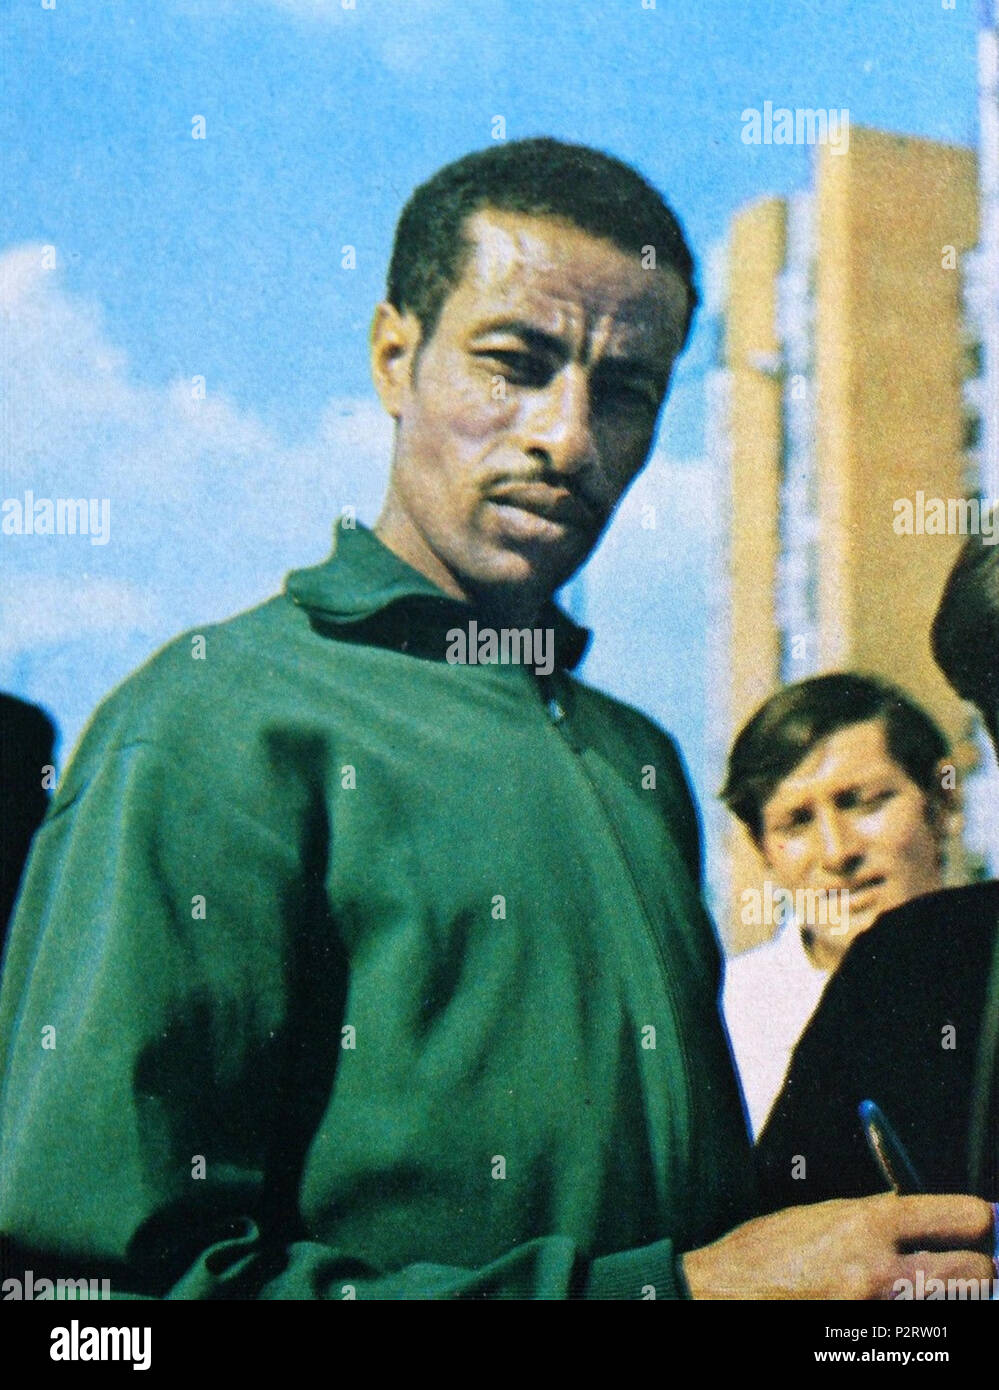 . IL MONELLO OLIMPIADI CENTO MEDAGLIE 1972 n.6 BIKILA , Figurina Calciatori NEW . Trading card or Figurina released in 1972. Photo most likely taken during or just after the 1960 Summer Olympics. Unknown 3 Abebe Bikila, 1972 card Stock Photo